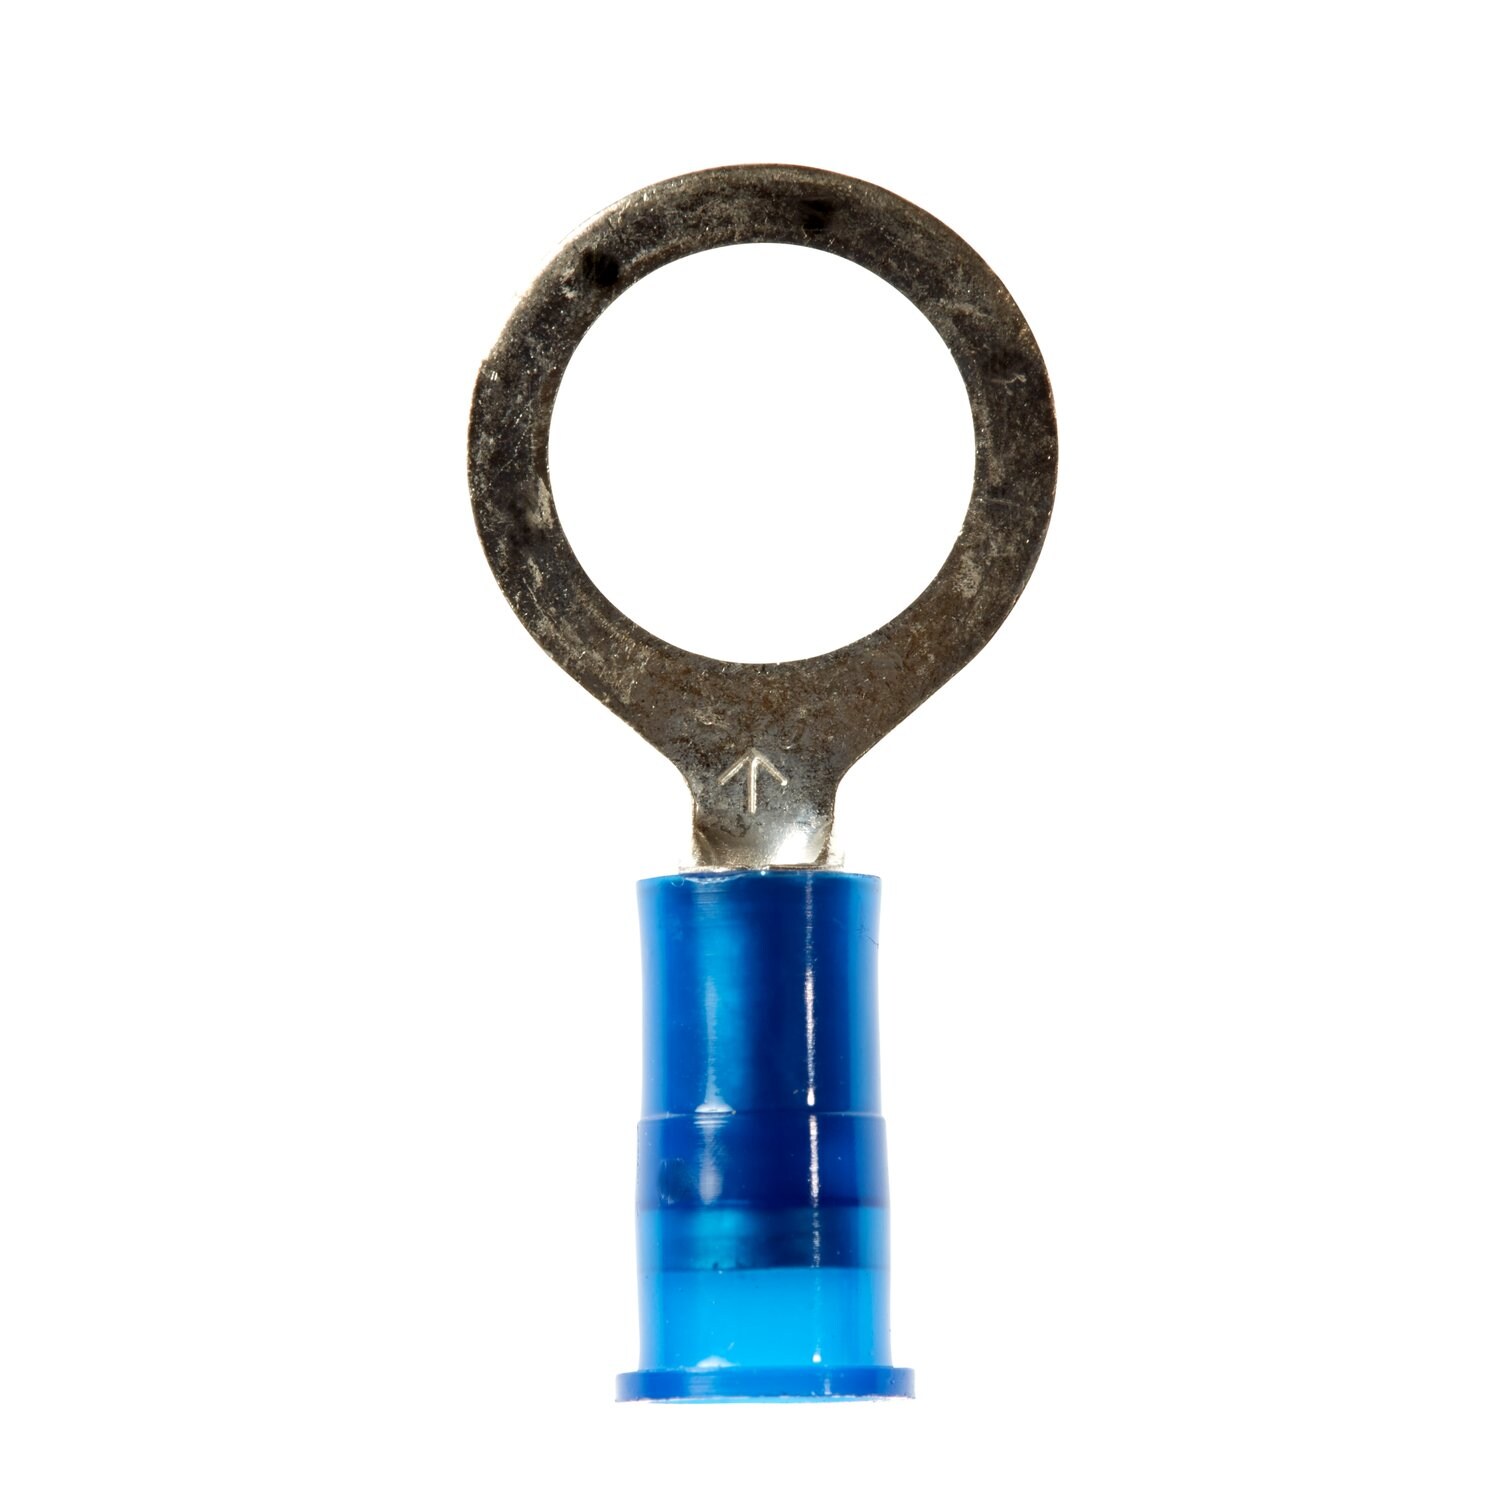 7100164006 - 3M Scotchlok Ring Tongue, Nylon Insulated w/Insulation Grip
MNG14-38RK, Stud Size 3/8, 1000/Case